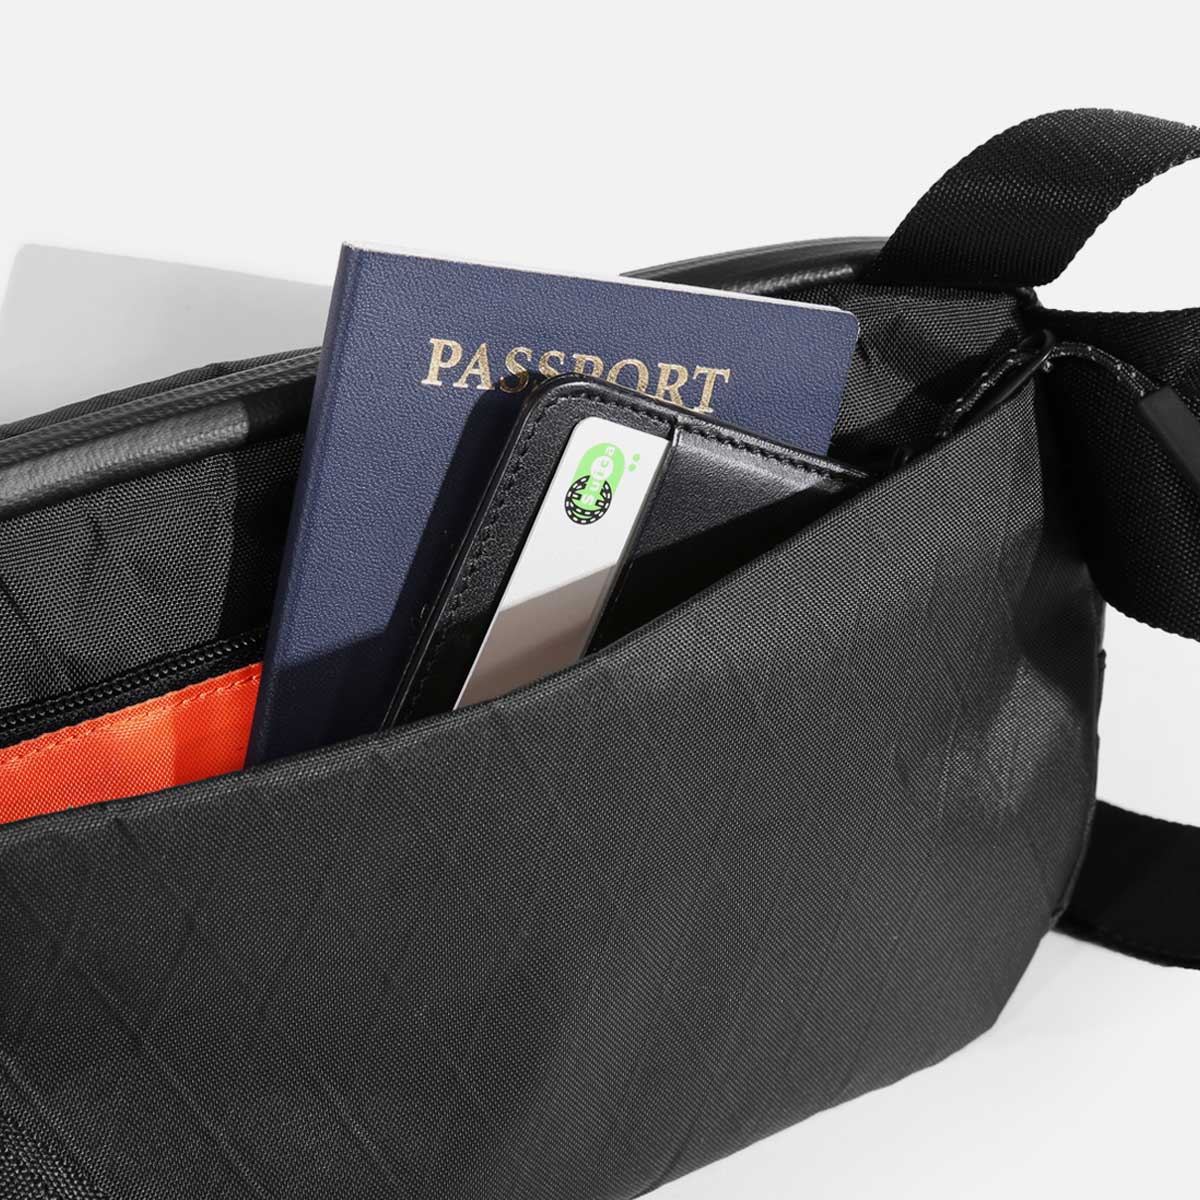 Keep your passport or wallet safe and secure.